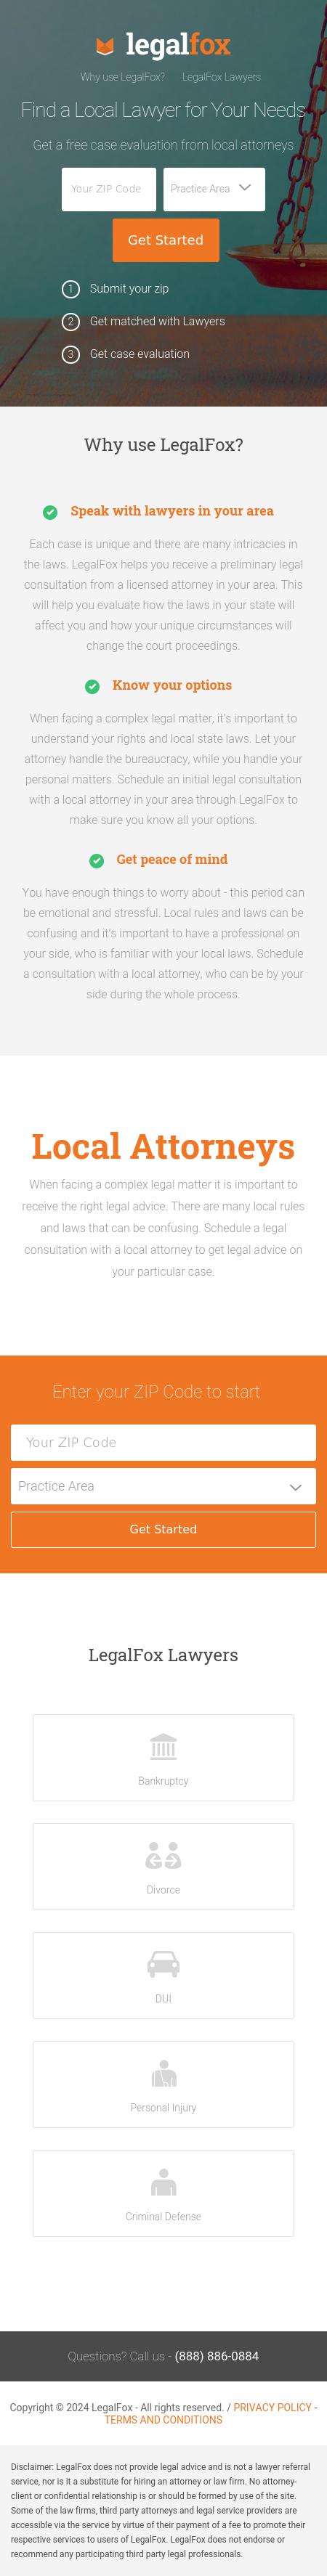 Find a Local Attorney - Irvine CA Lawyers